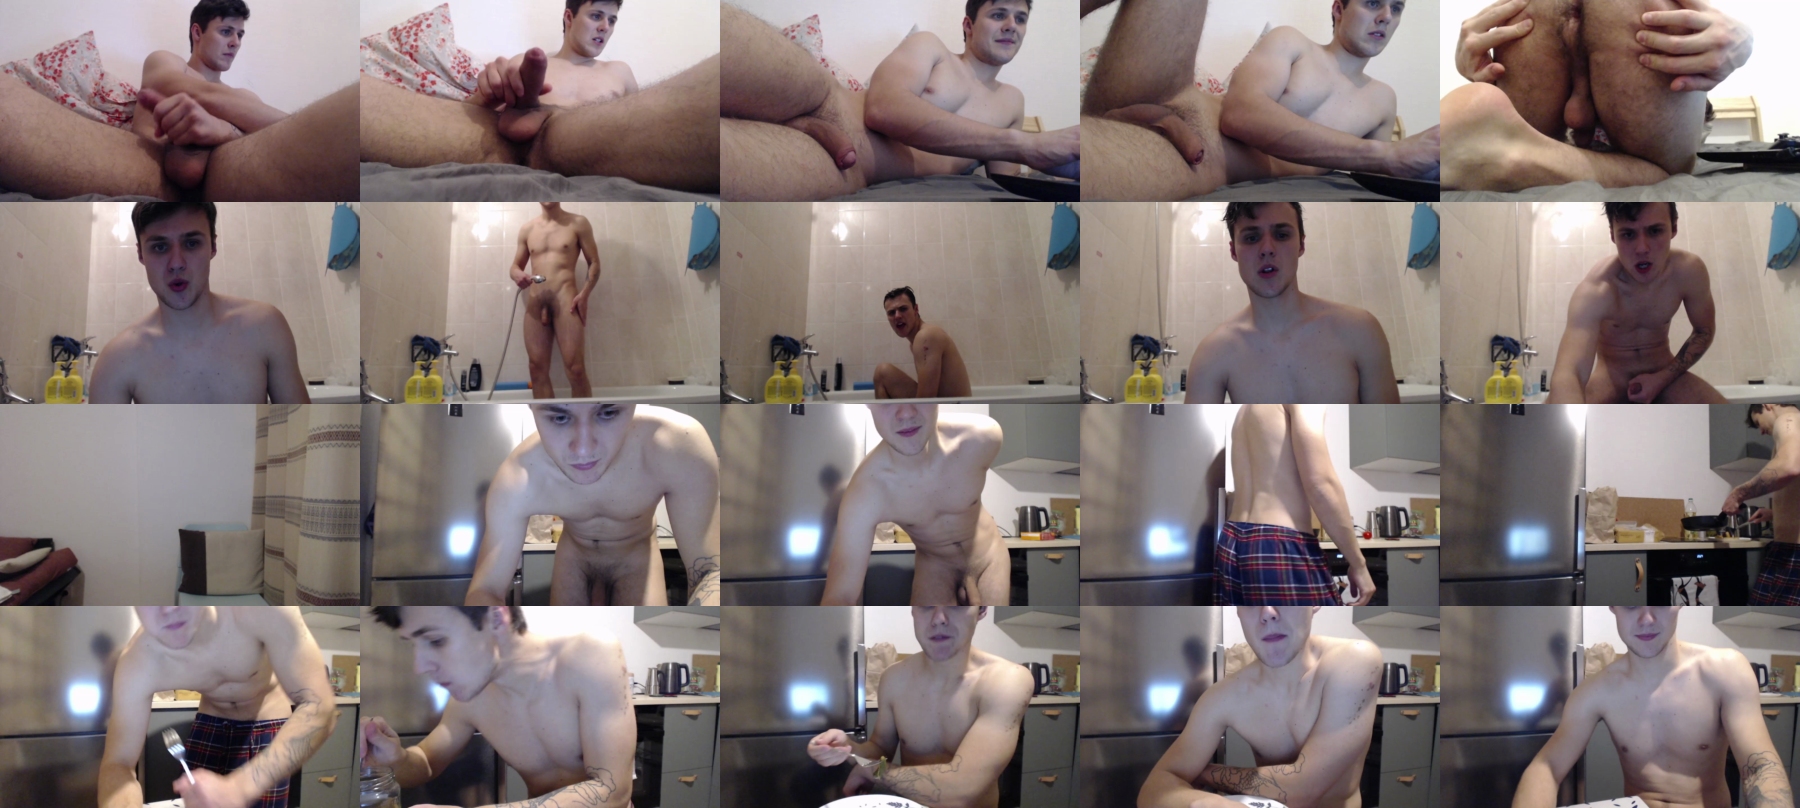 Sexyrussianboys  19-11-2021